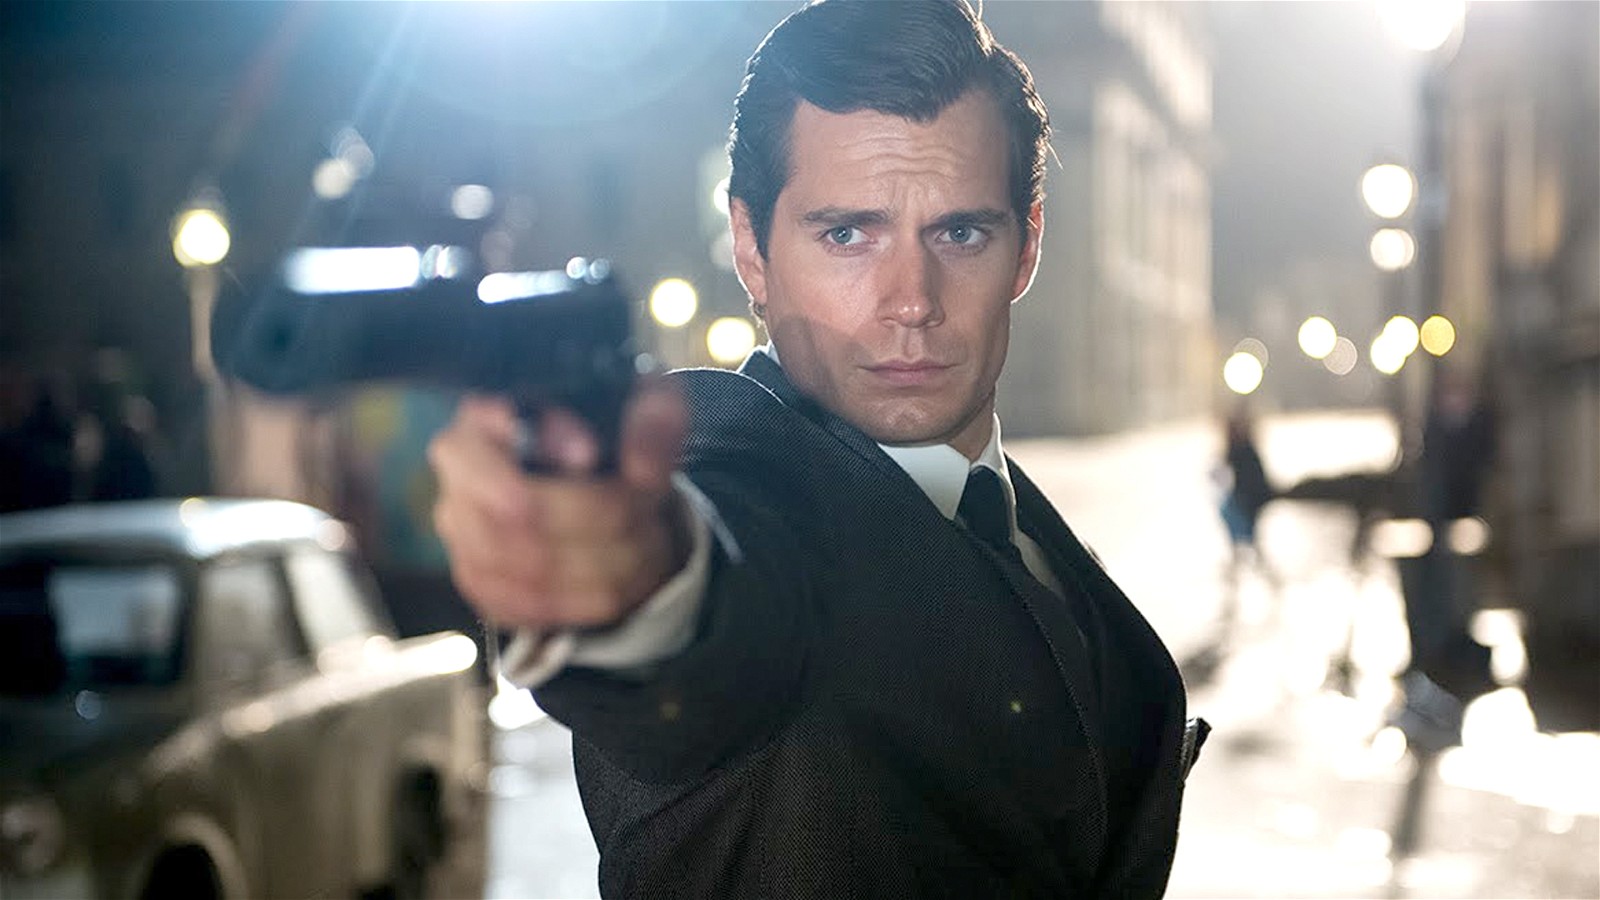 Henry Cavill plays a spy in Guy Ritchie's The Man From U.N.C.L.E.